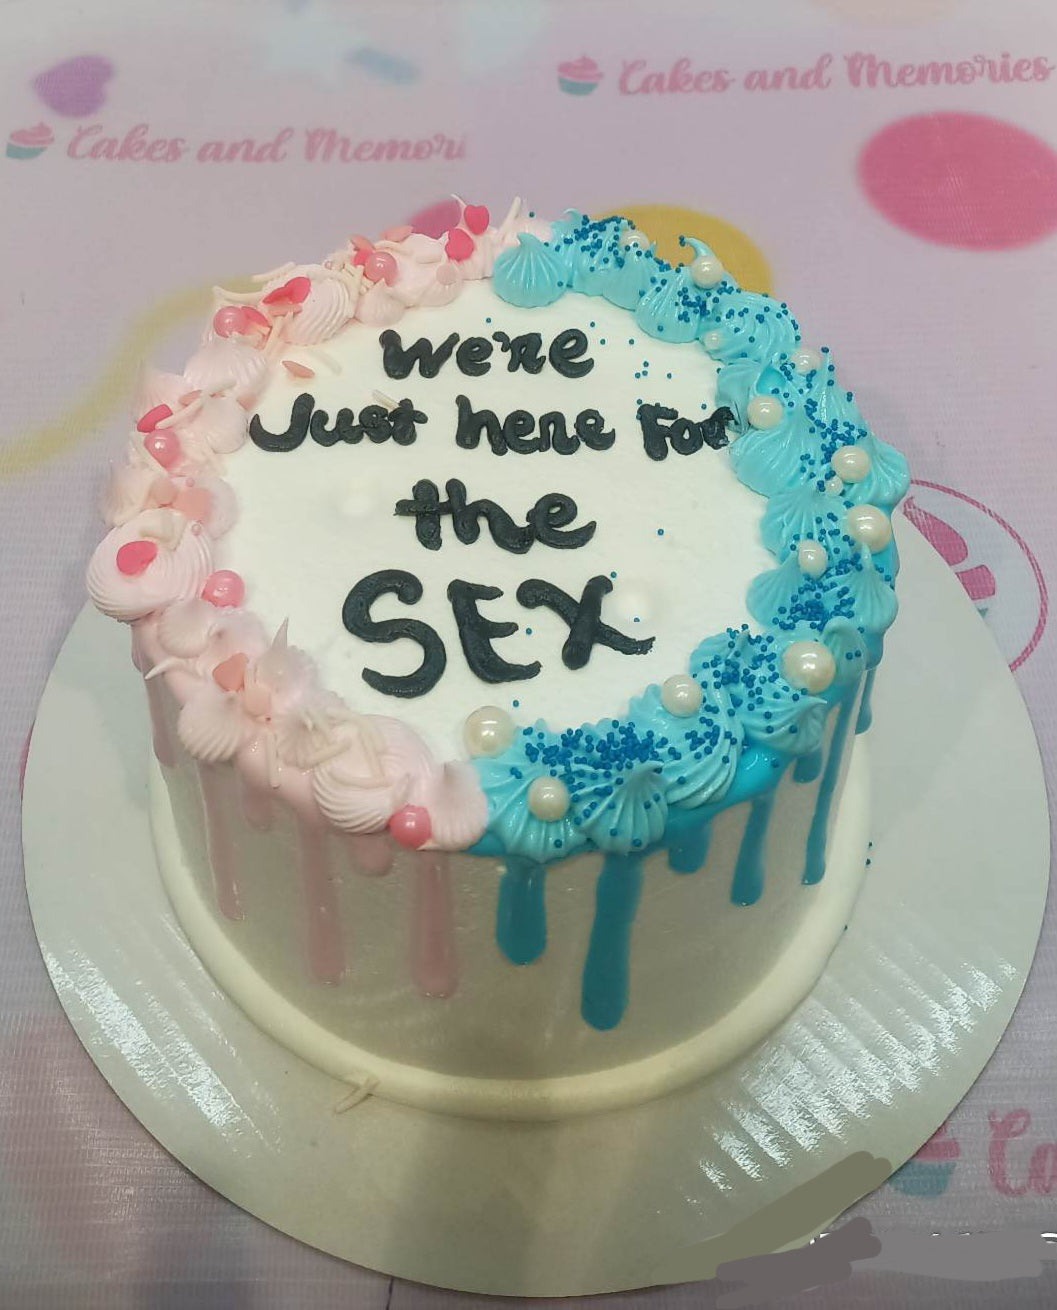 This gorgeous Gender Reveal Cake is the perfect way to announce the gender of your baby. It has a beautiful combination of pink and blue colors, with a phrase - "We're Just Here for the Sex" - adorning the cake. The cake is customizable, with options to include a baby and other elements related to gender reveal or pregnancy. It is perfect for celebrating the upcoming arrival of a baby boy or girl!